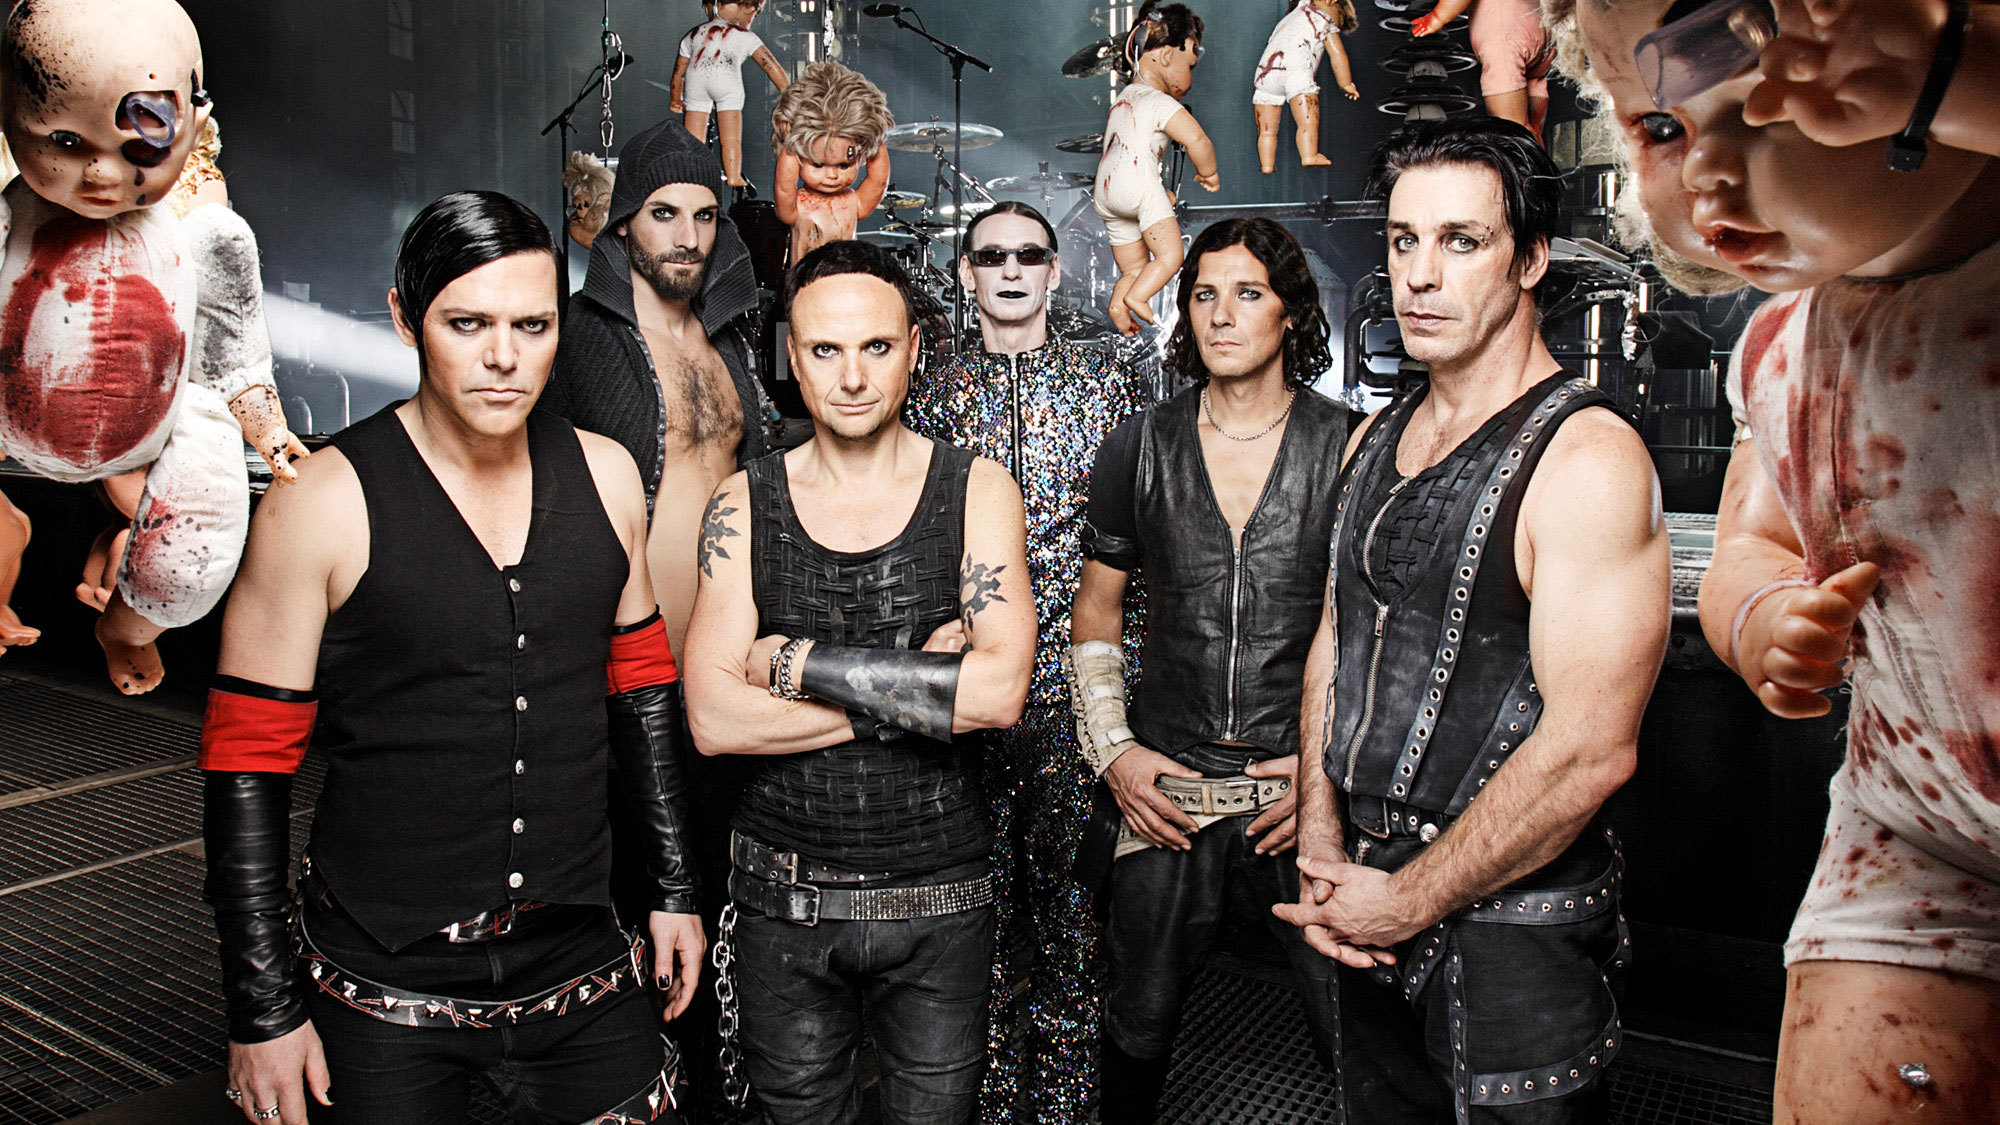 The 20 greatest Rammstein songs – ranked